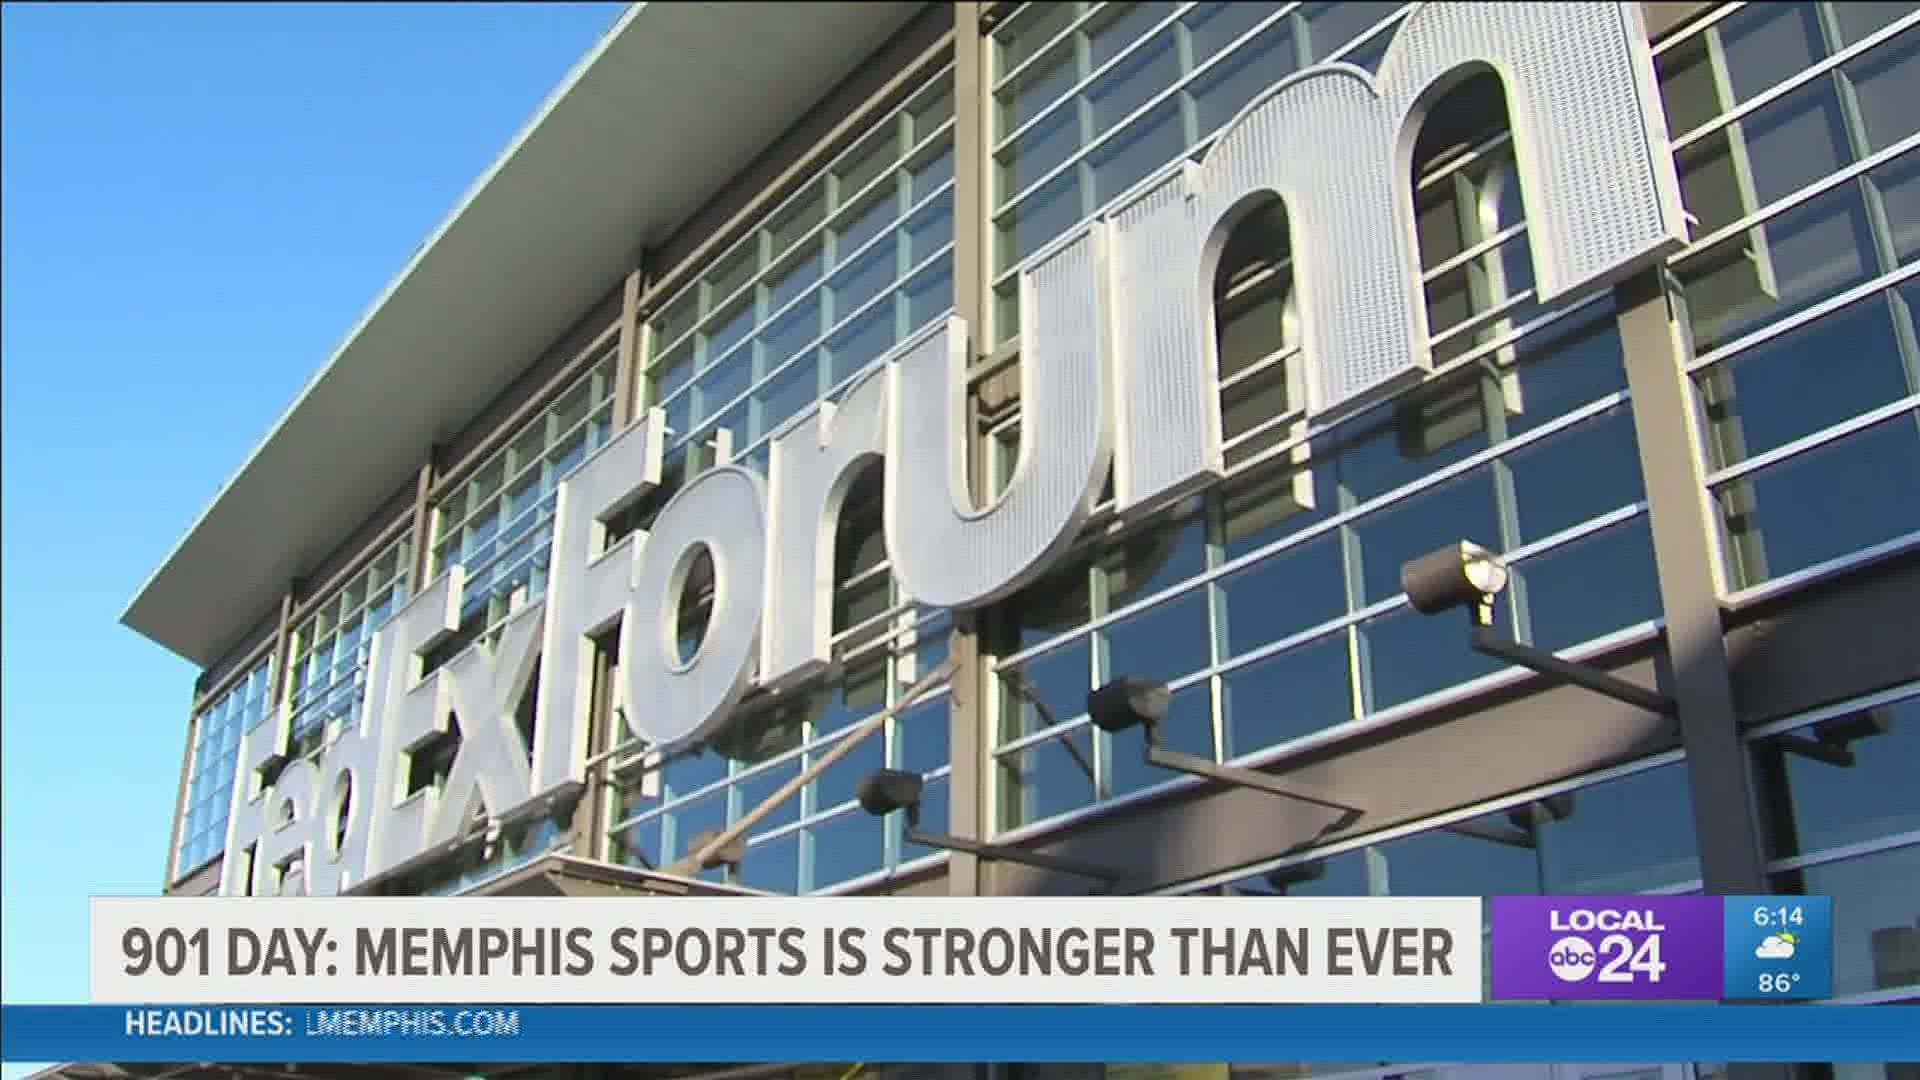 The future is bright for all of Memphis sports, the Grizzlies and Tigers athletics in particular